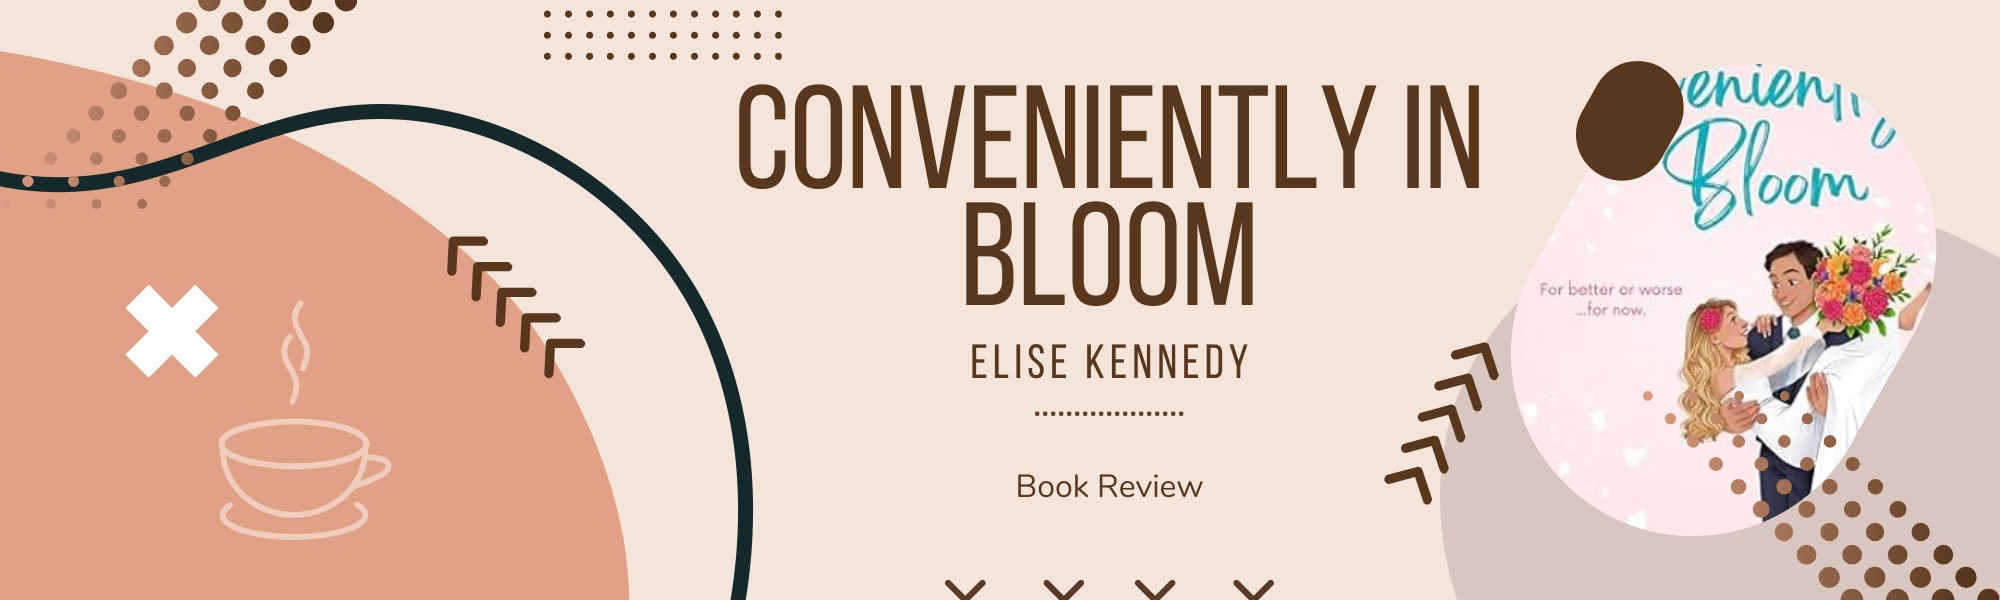 Book Review – ‘Conveniently in Bloom’ by Elise Kennedy